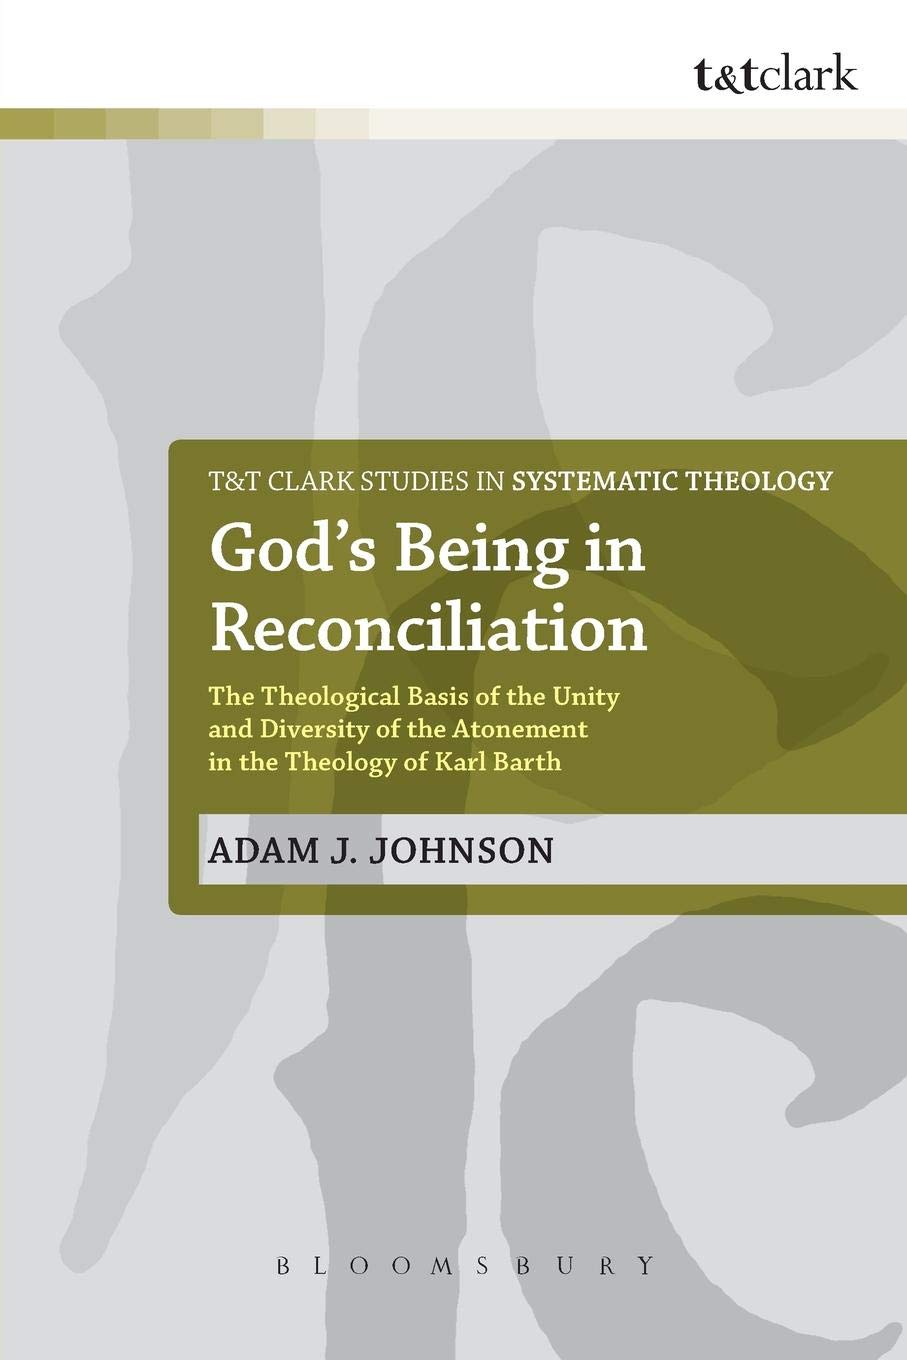 God's Being in Reconciliation: The Theological Basis of the Unity and Diversity of the Atonement in the Theology of Karl Barth 